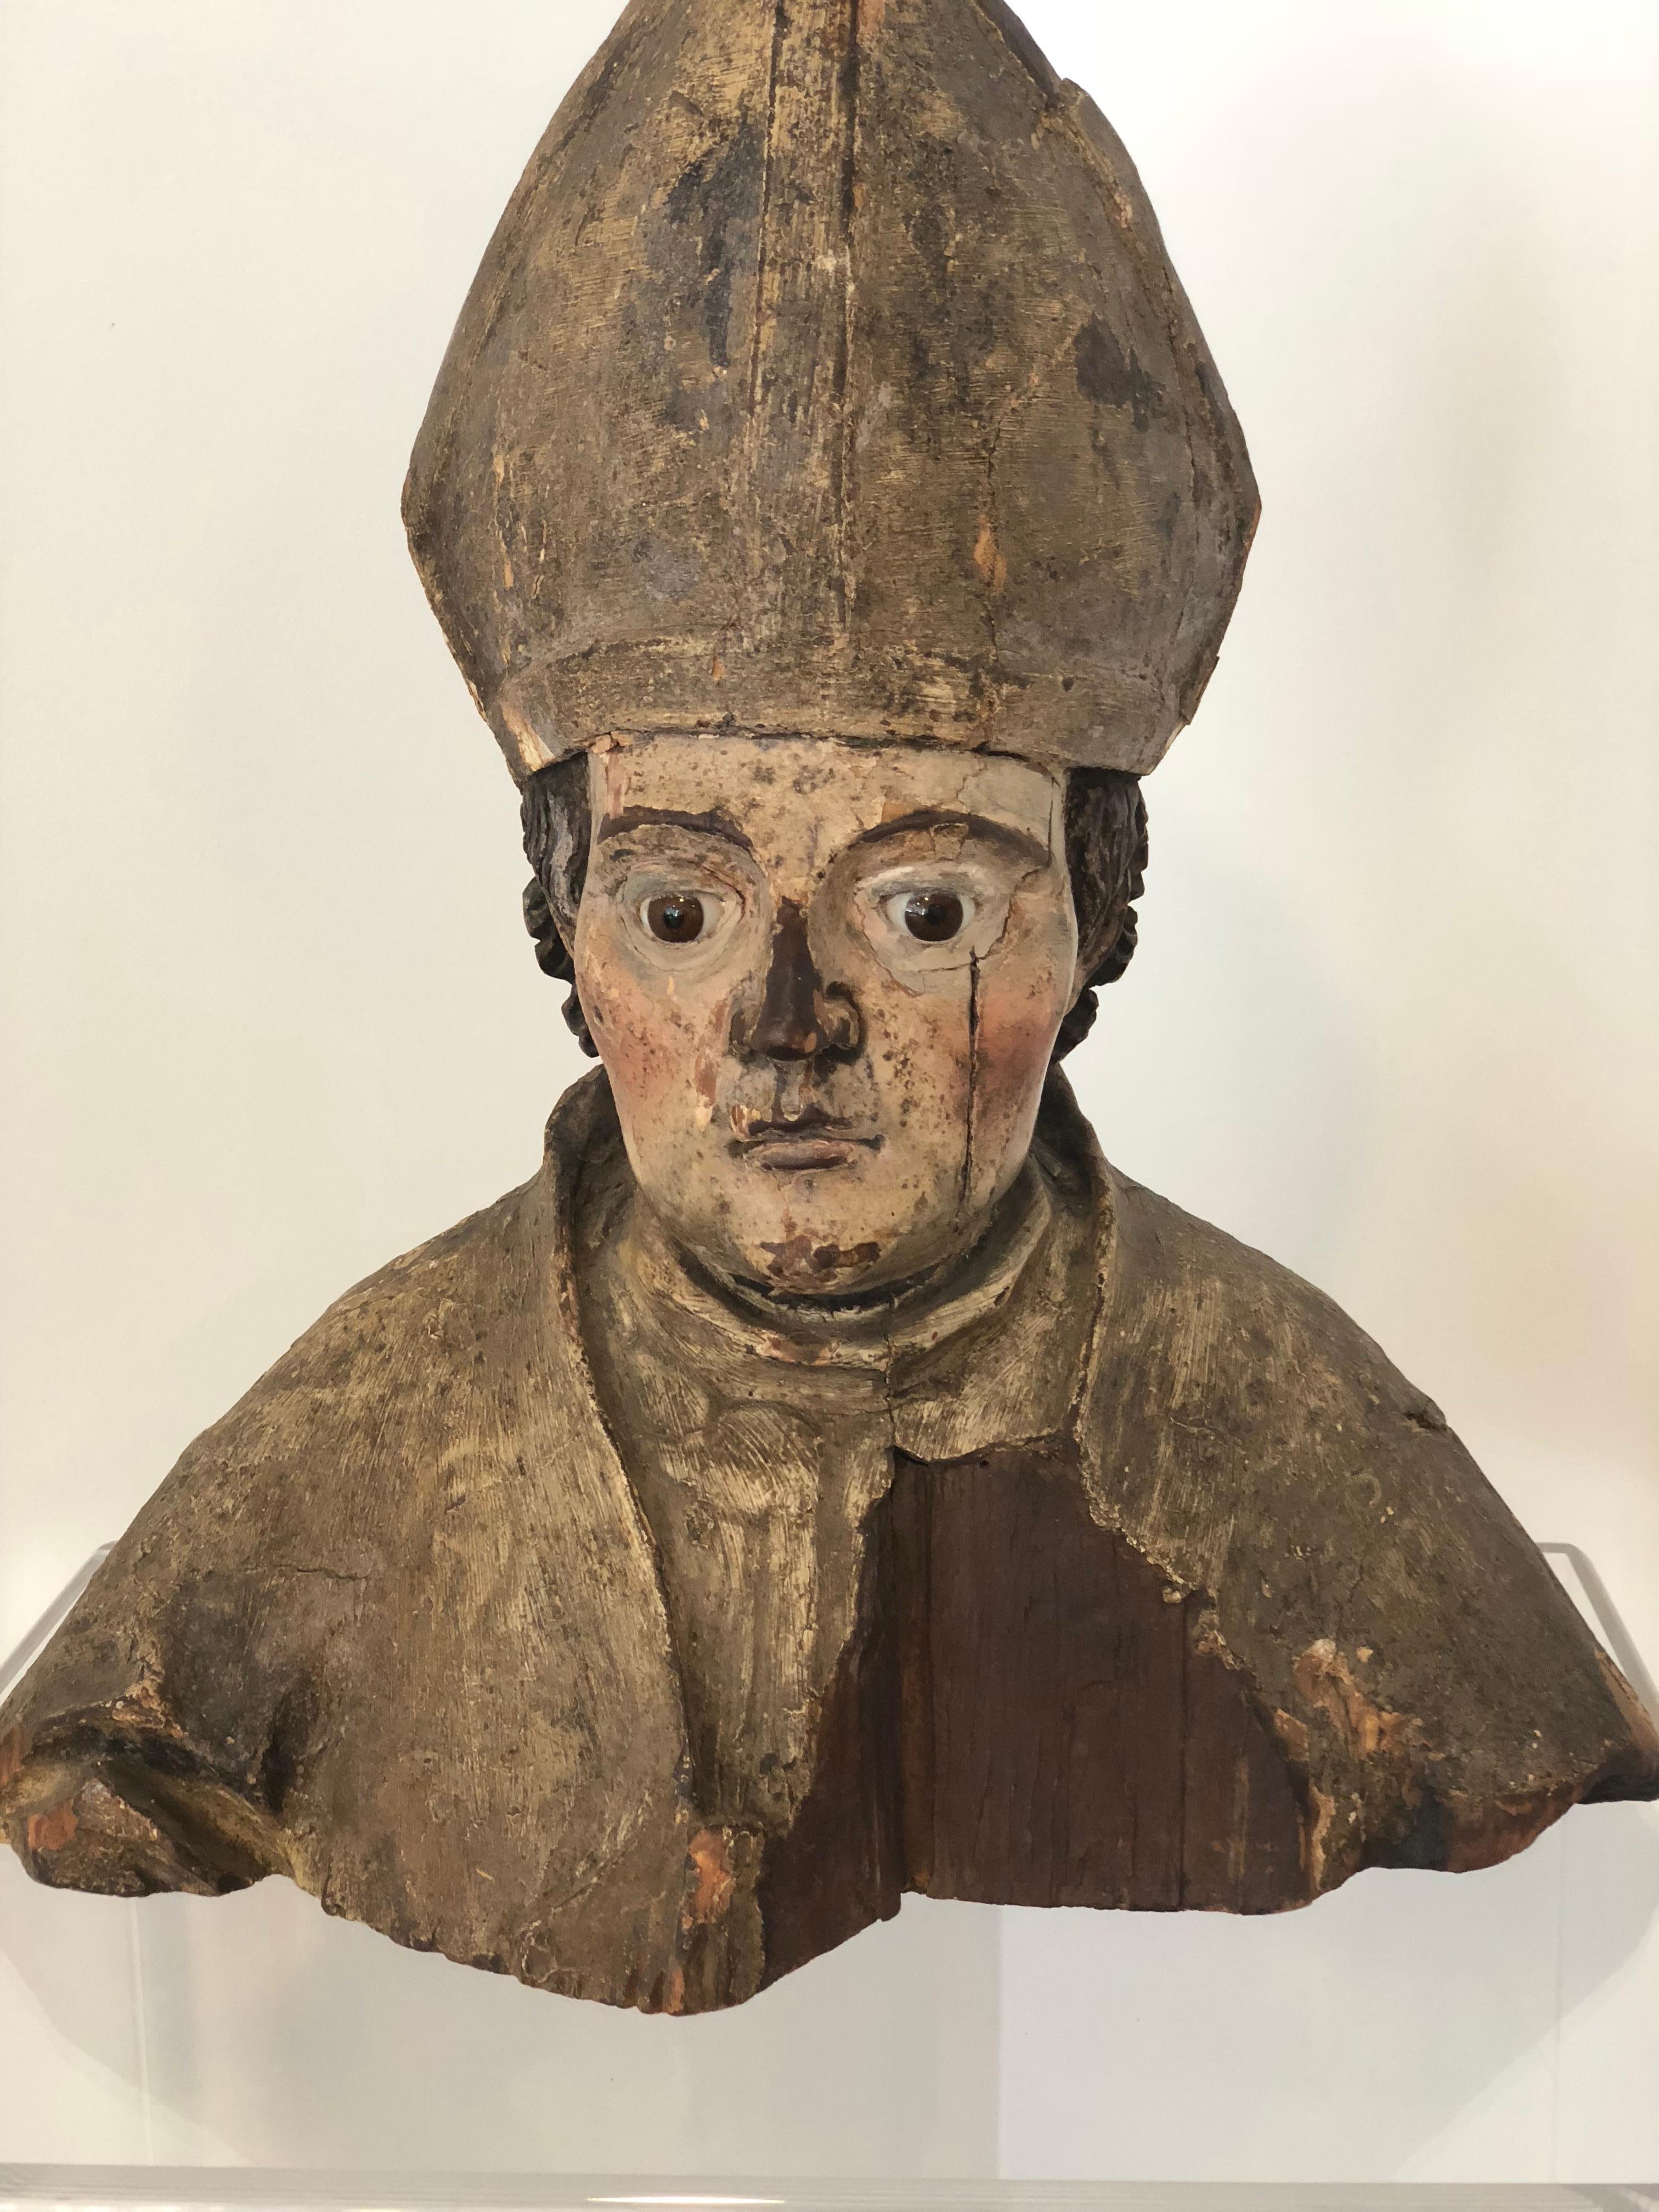 Wood Carving from the 18th Century of  a bishop or other religious figure with incredible presence and gorgeous patina. Both glass eyes are still in tact. It has some loss to the front chest and top, but this only enhances this thoughtful character